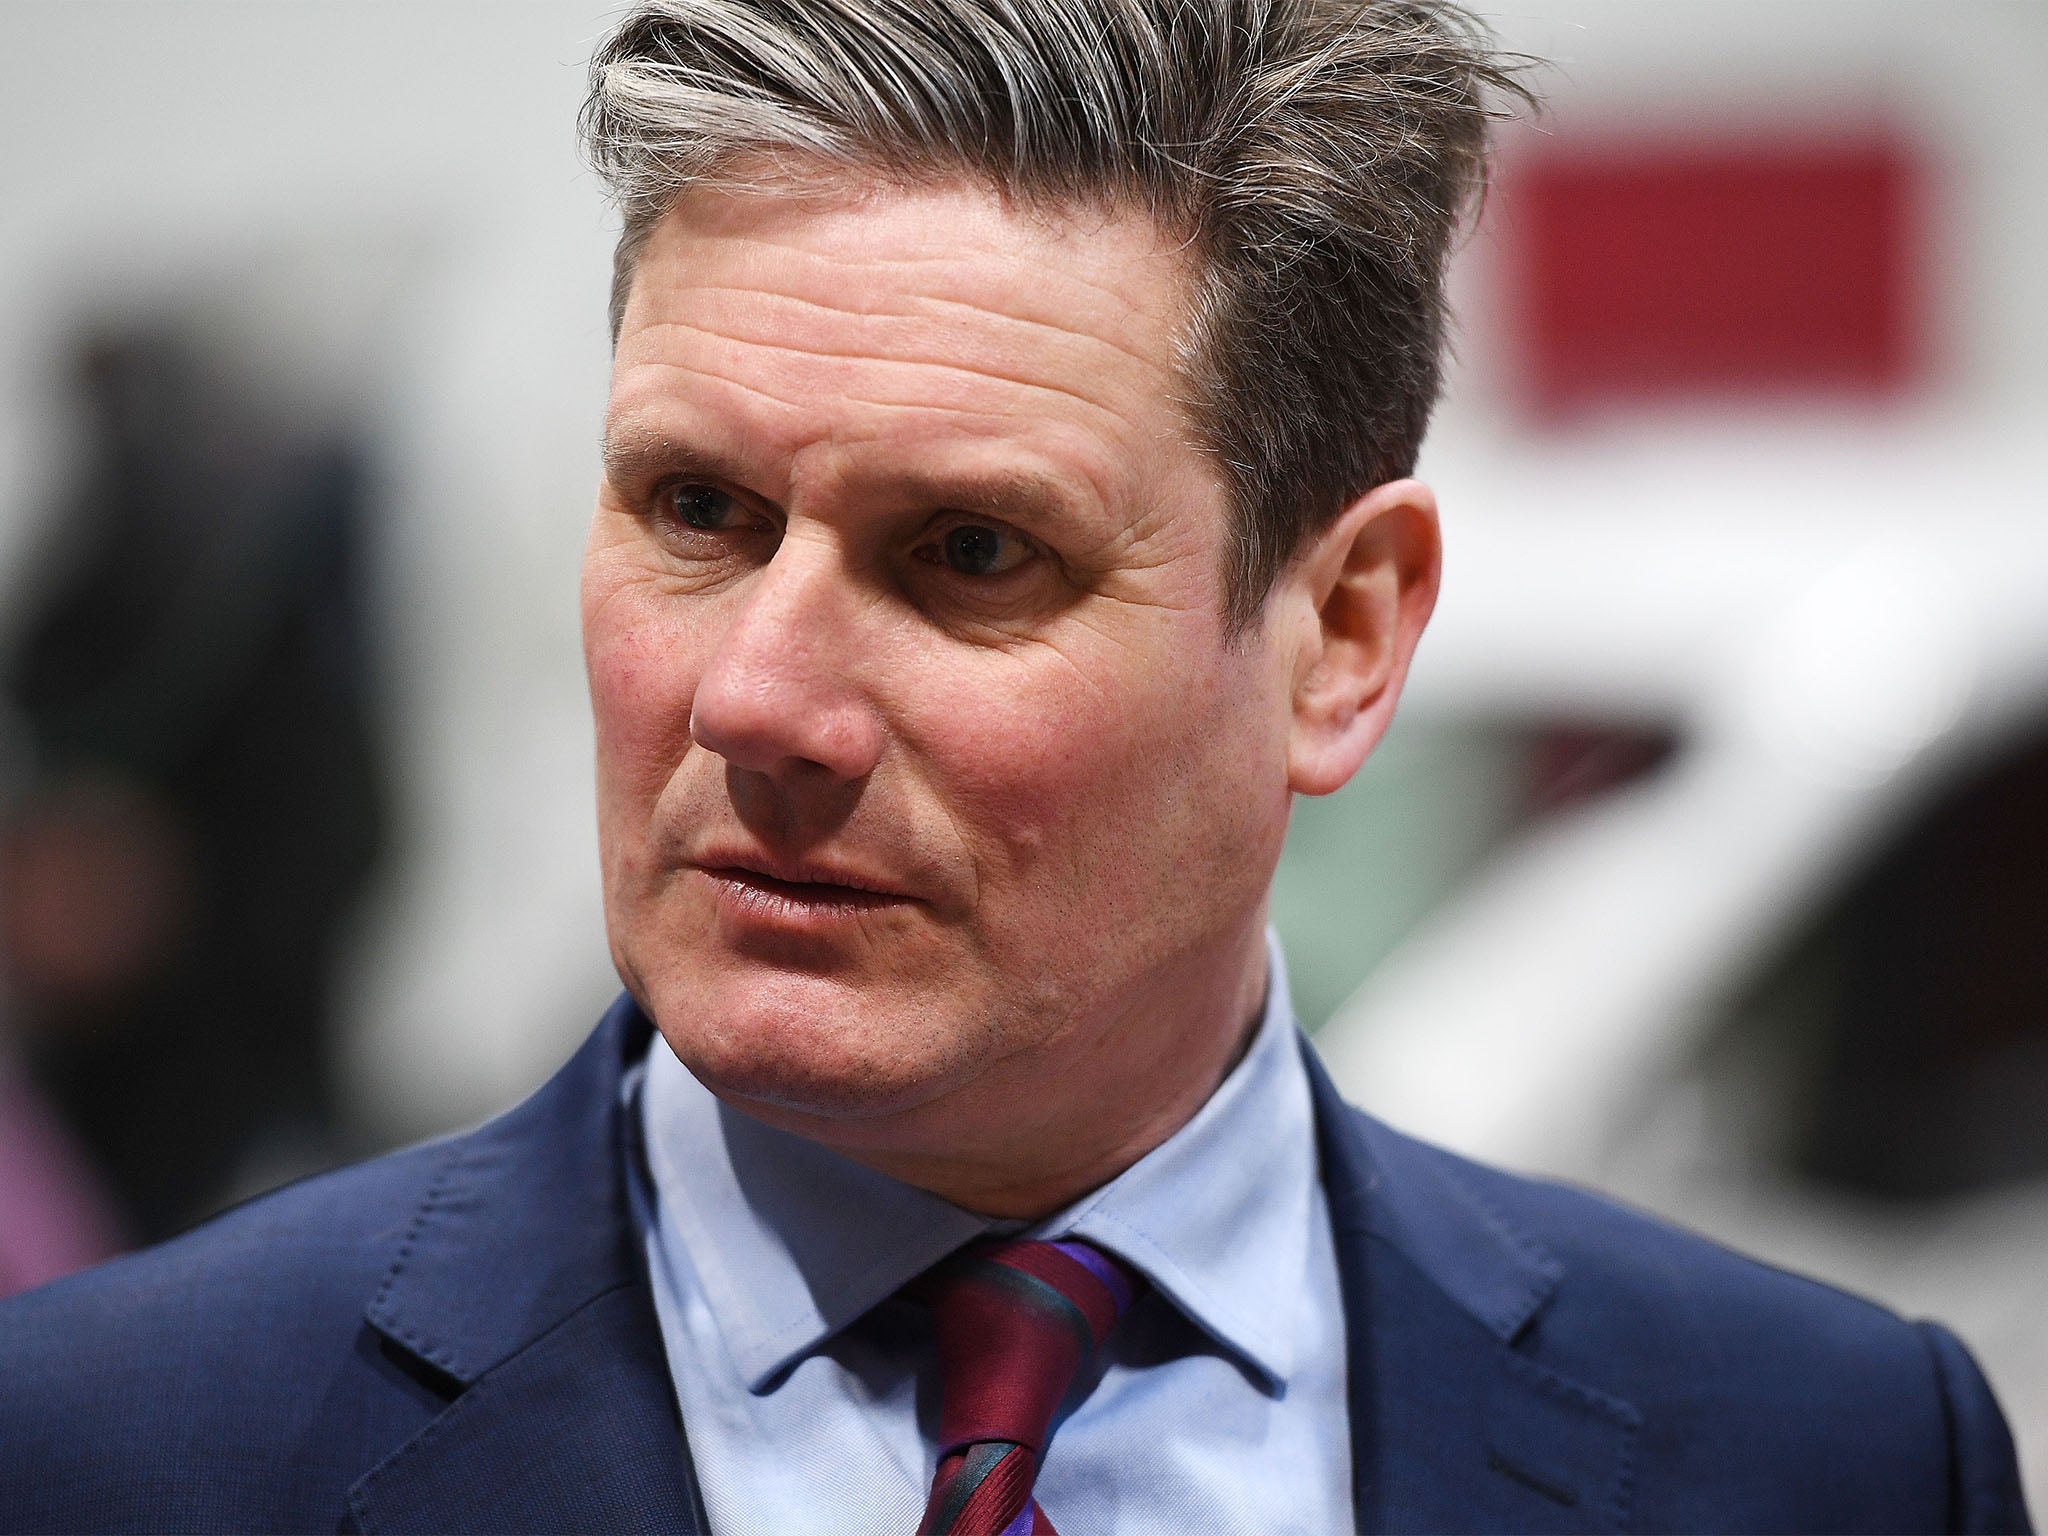 Sir Keir Starmer said Labour needed to 'get to a position where we are supporting the full definition' on antisemitism